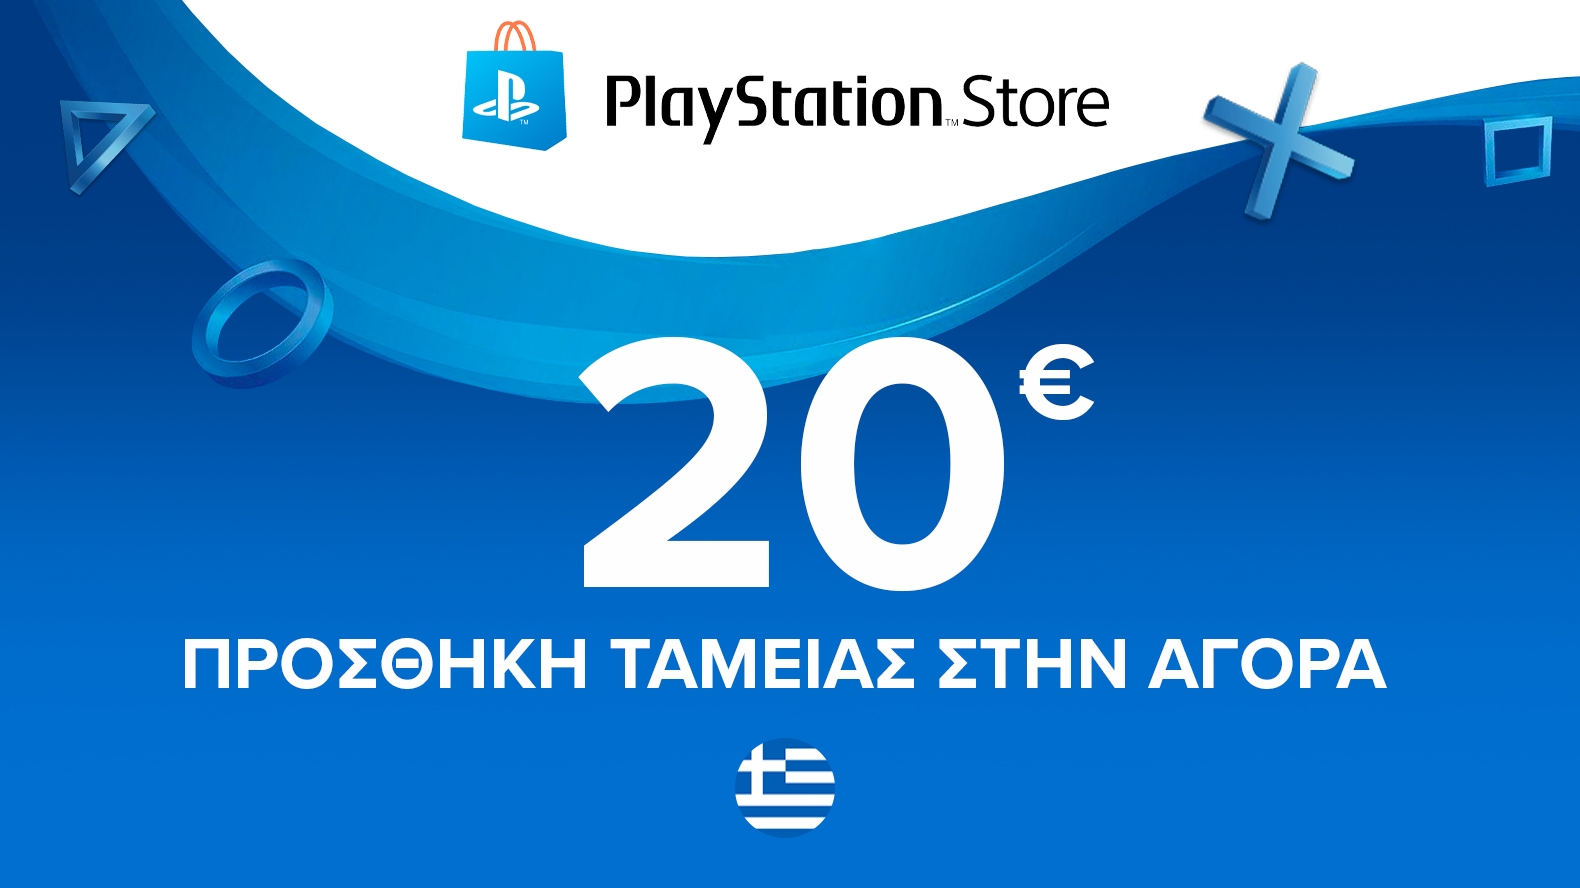 gift card 20 ps4